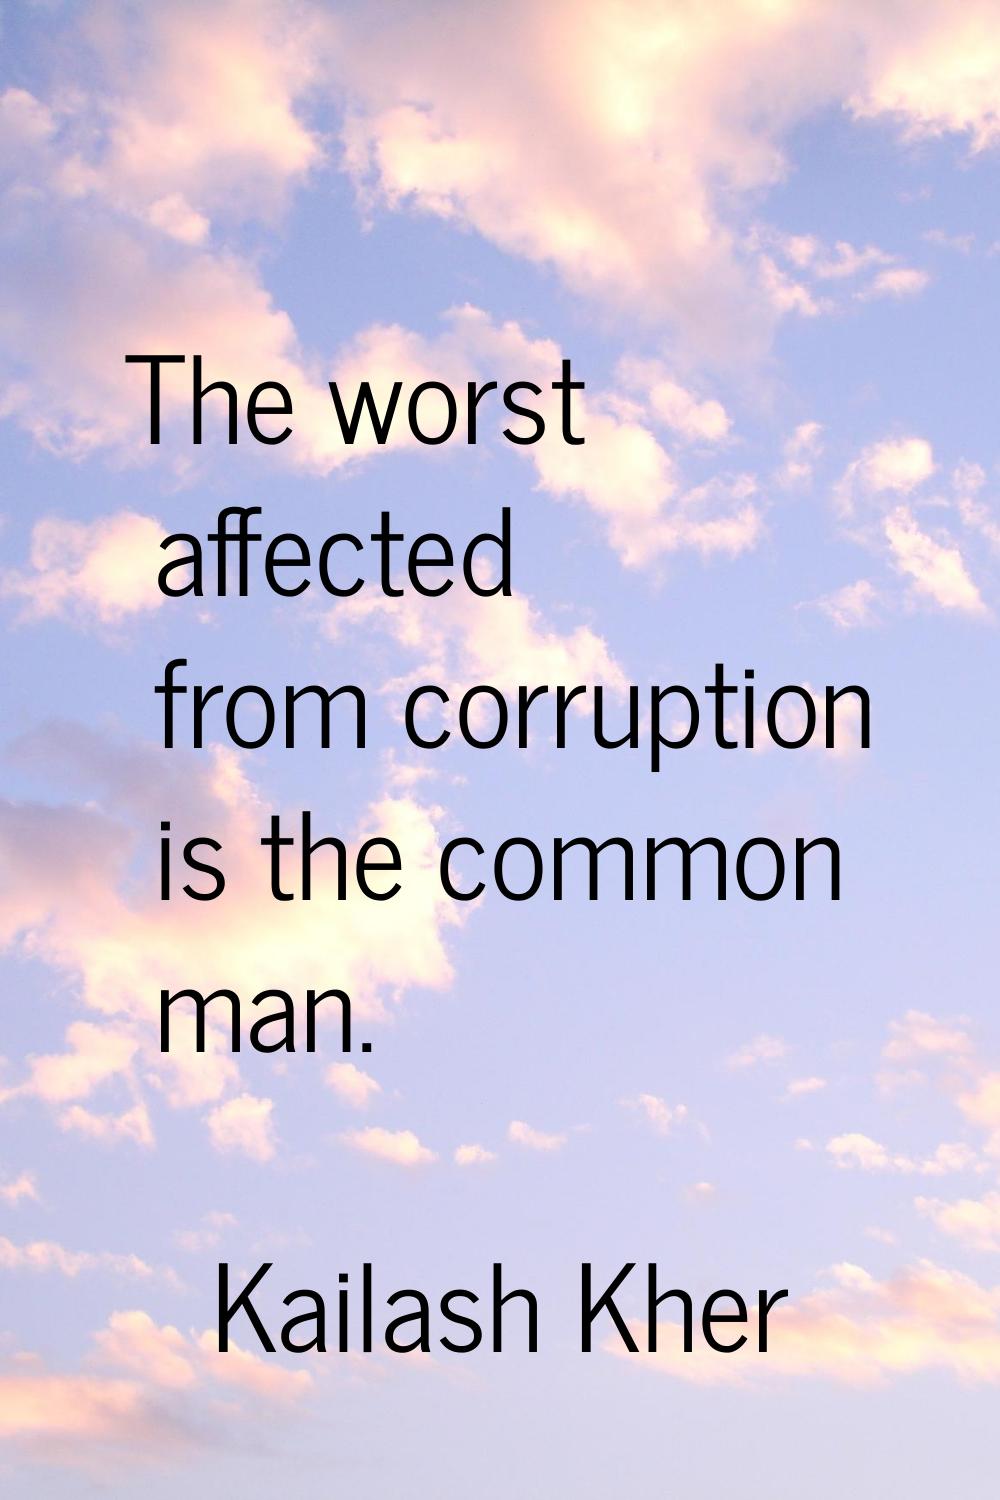 The worst affected from corruption is the common man.